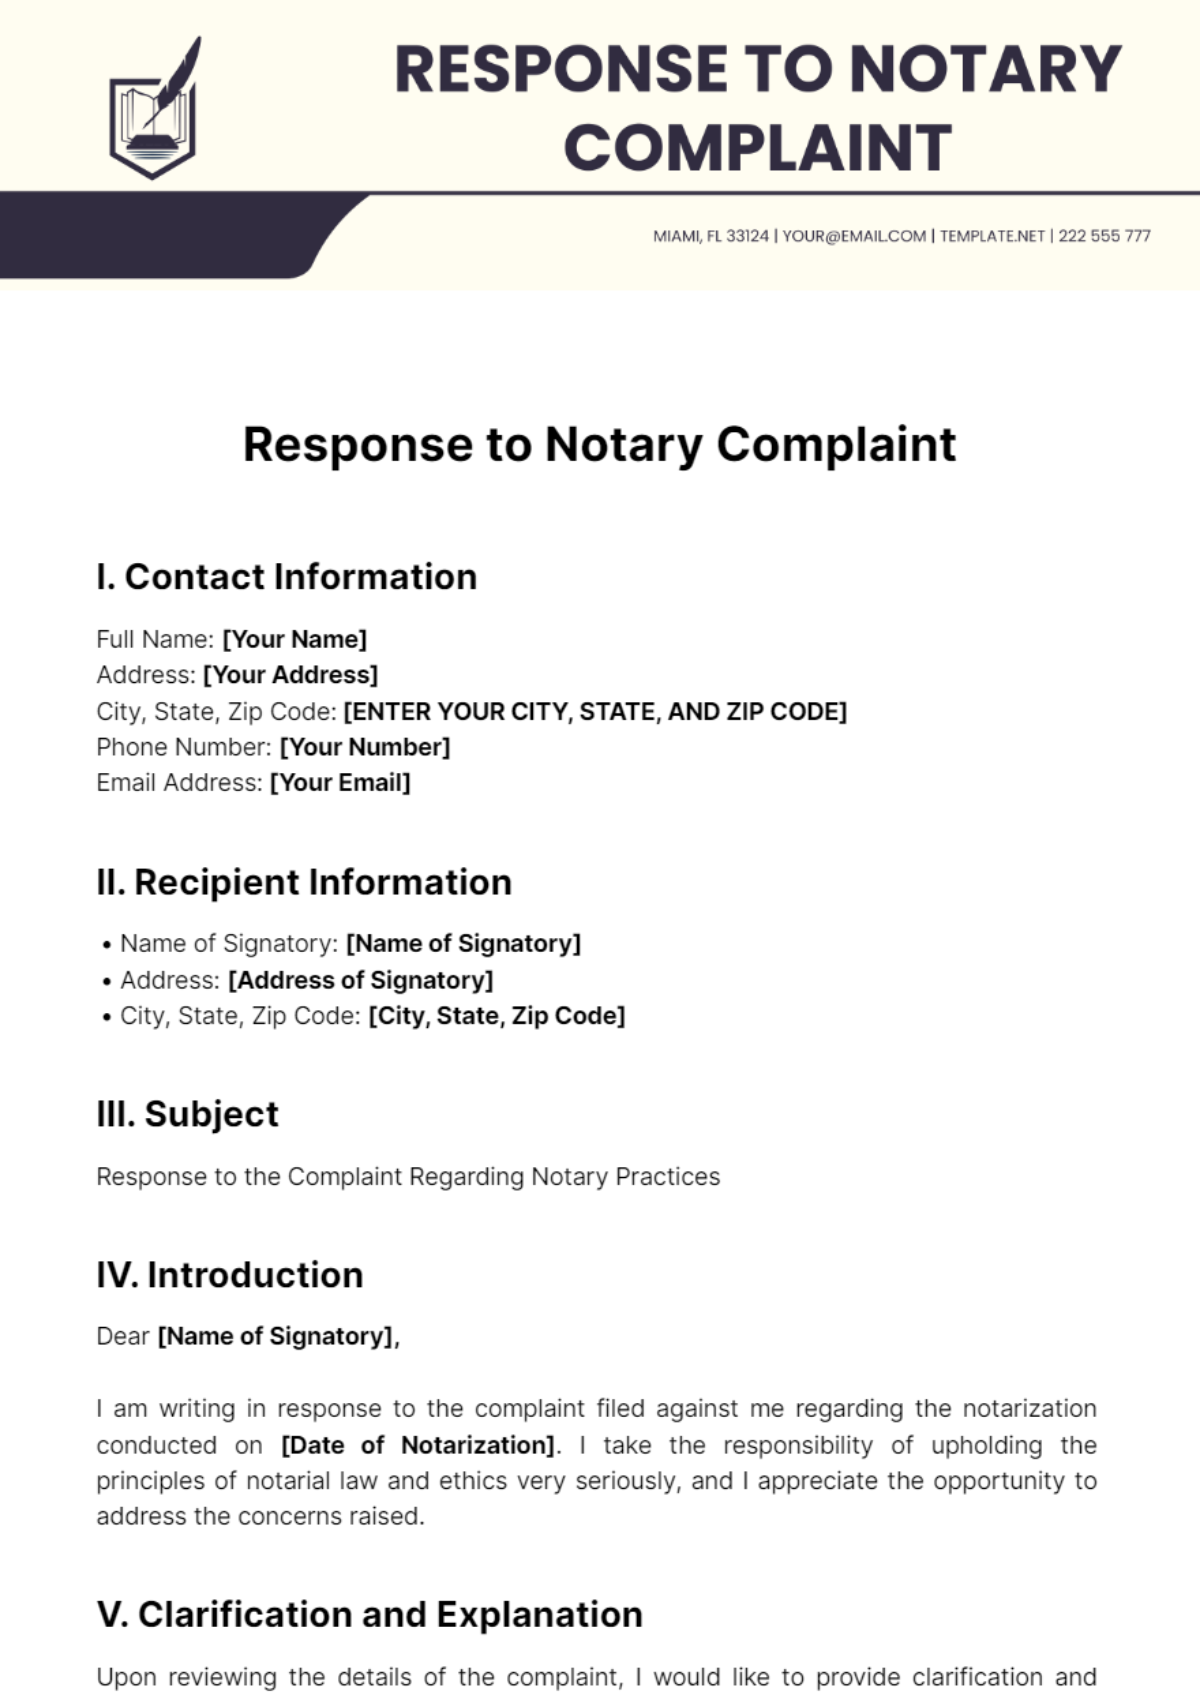 Free Response To Notary Complaint Template